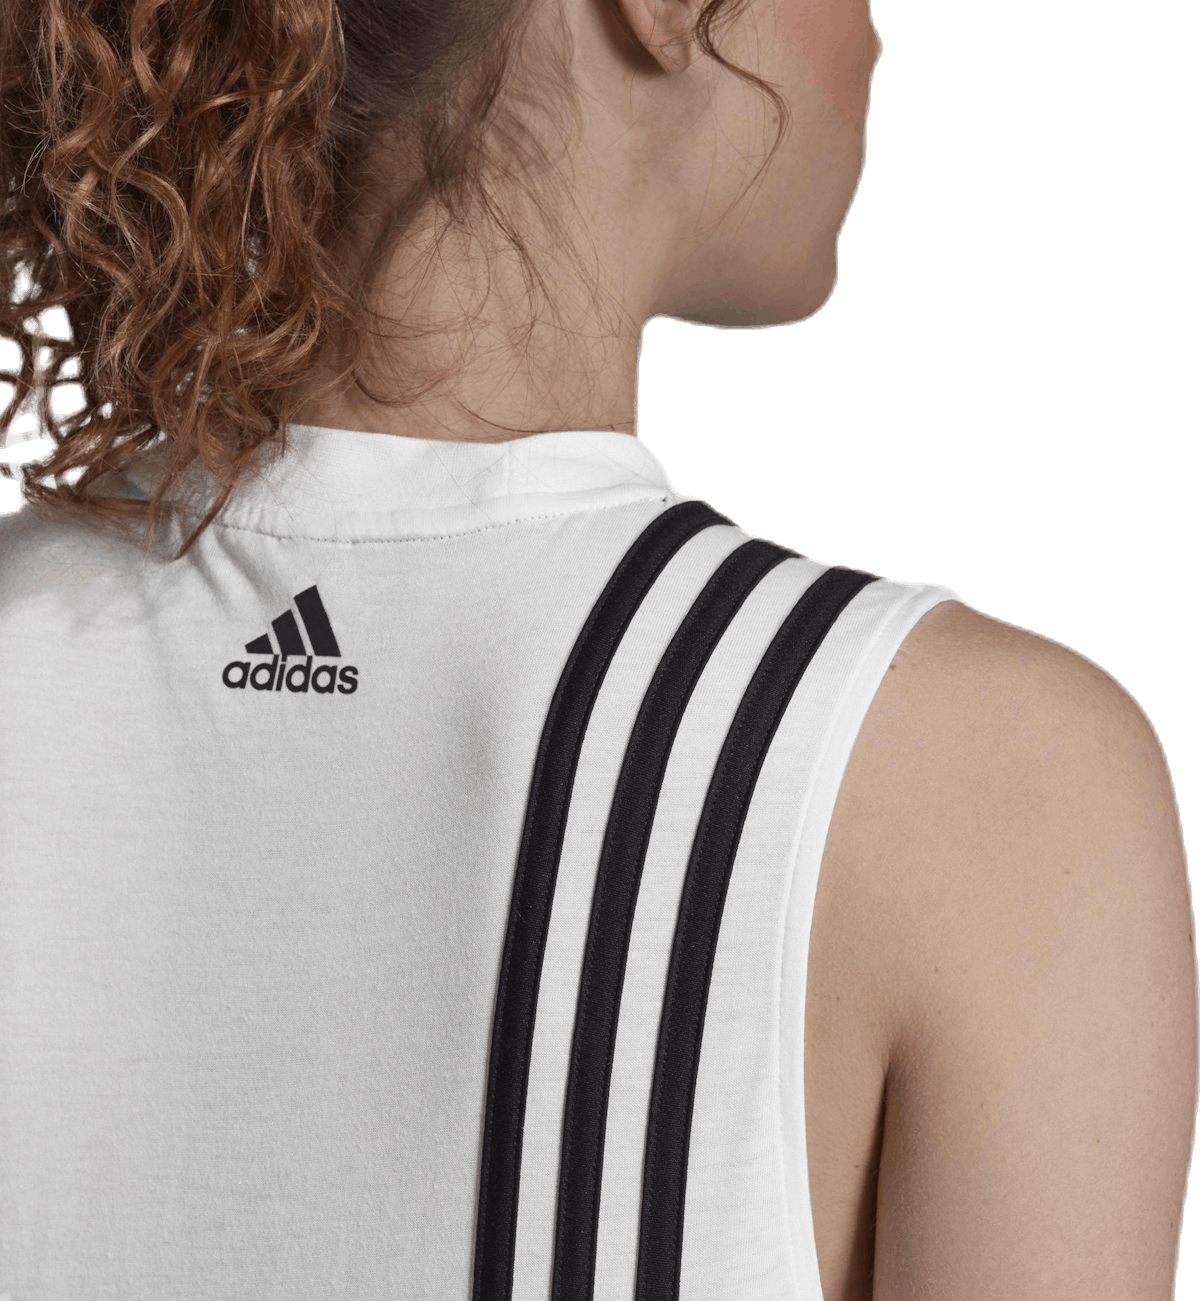 Must Haves 3-Stripes Tank Top White